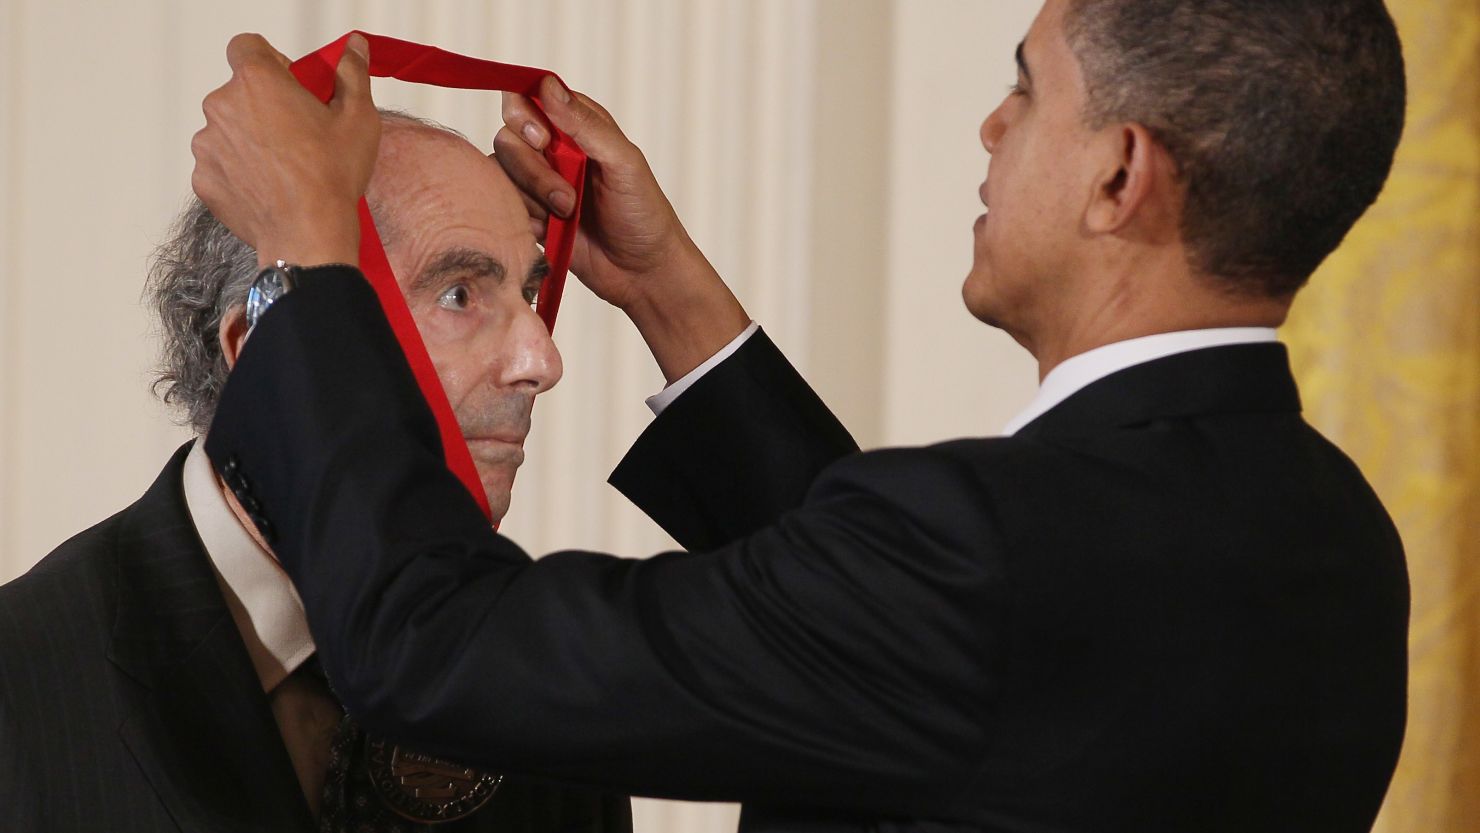 President Obama presents the 2010 National Humanities Medal to novelist Philip Roth during a White House ceremony in 2011.